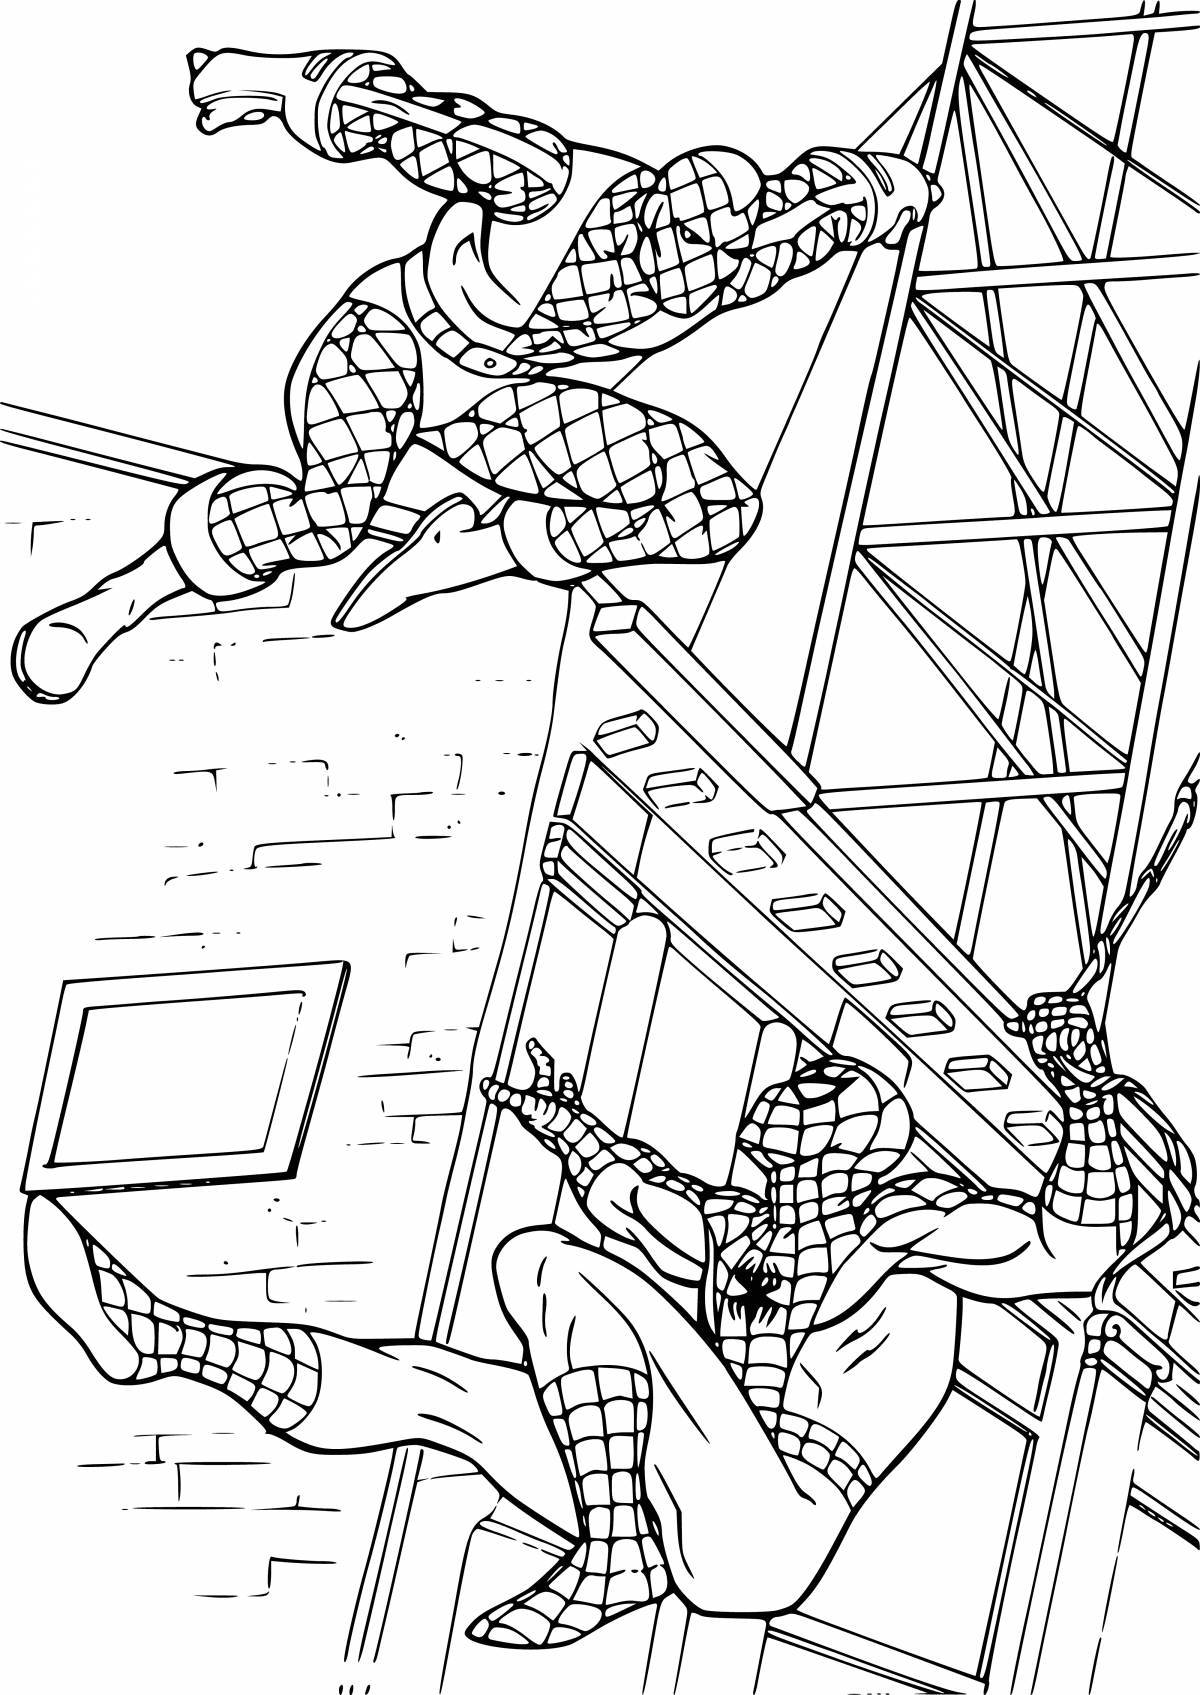 Spiderman's thrilling coloring book